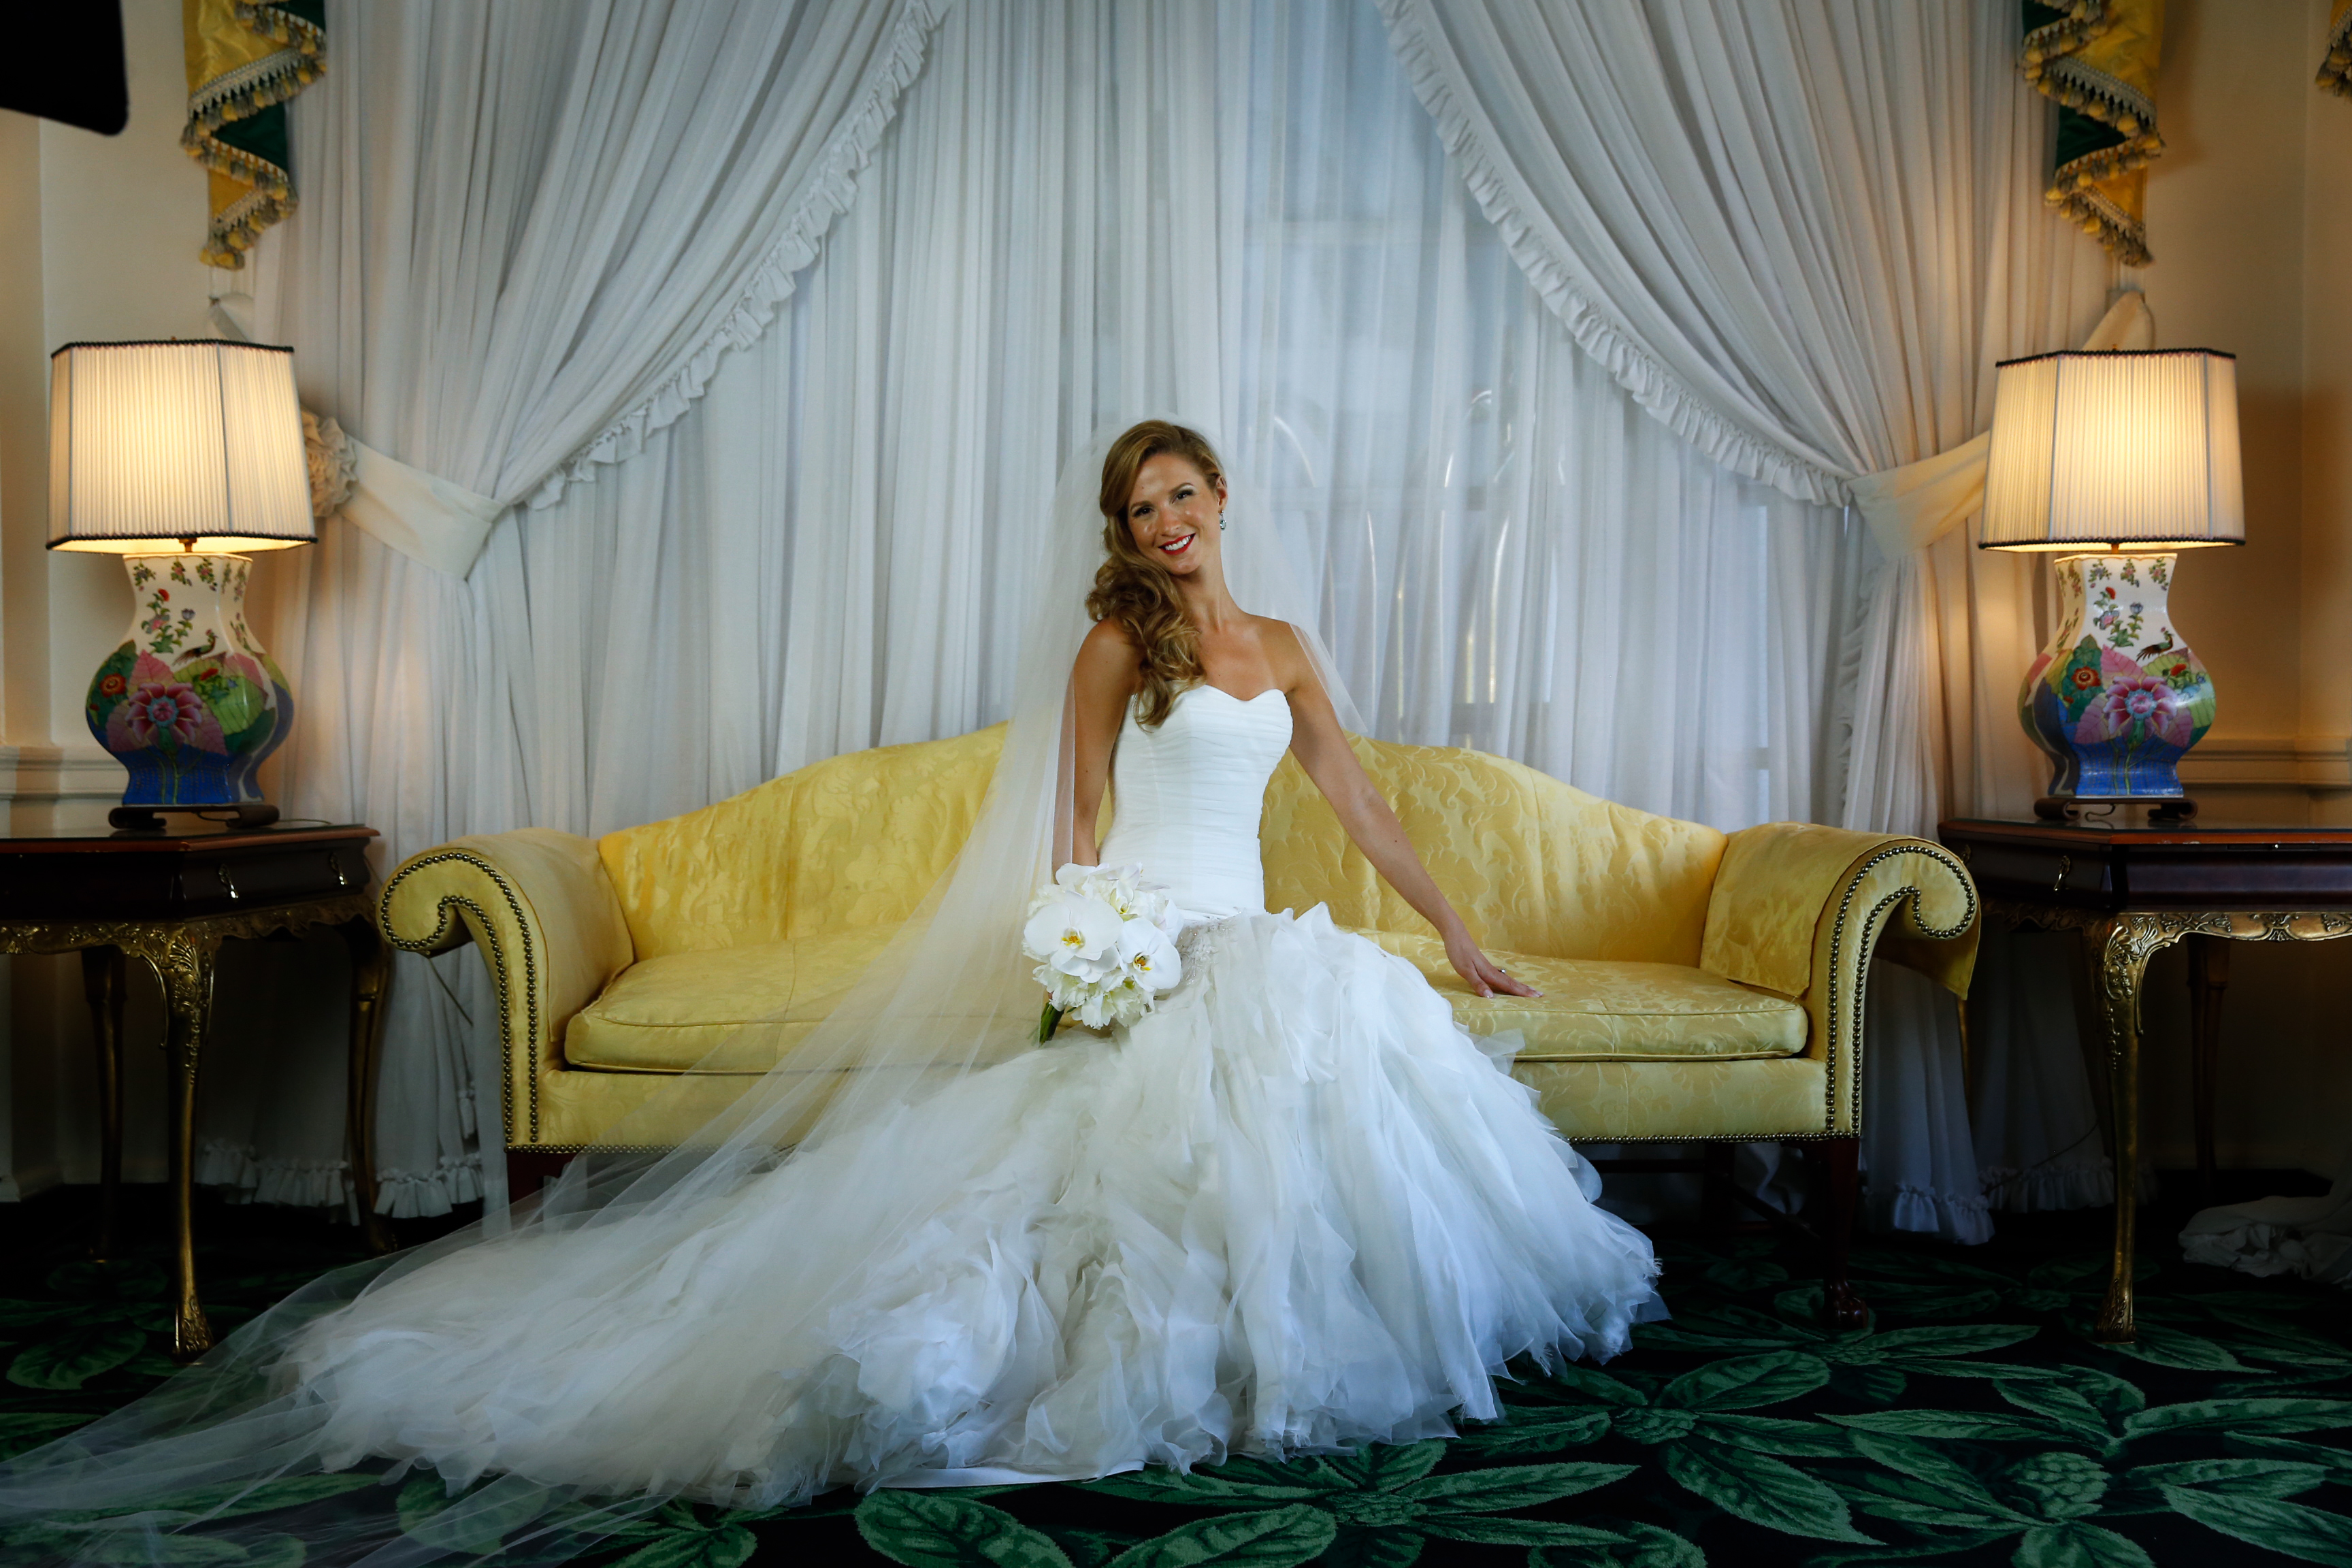 Looking fantastic for her bridal portraits at The Greenbrier